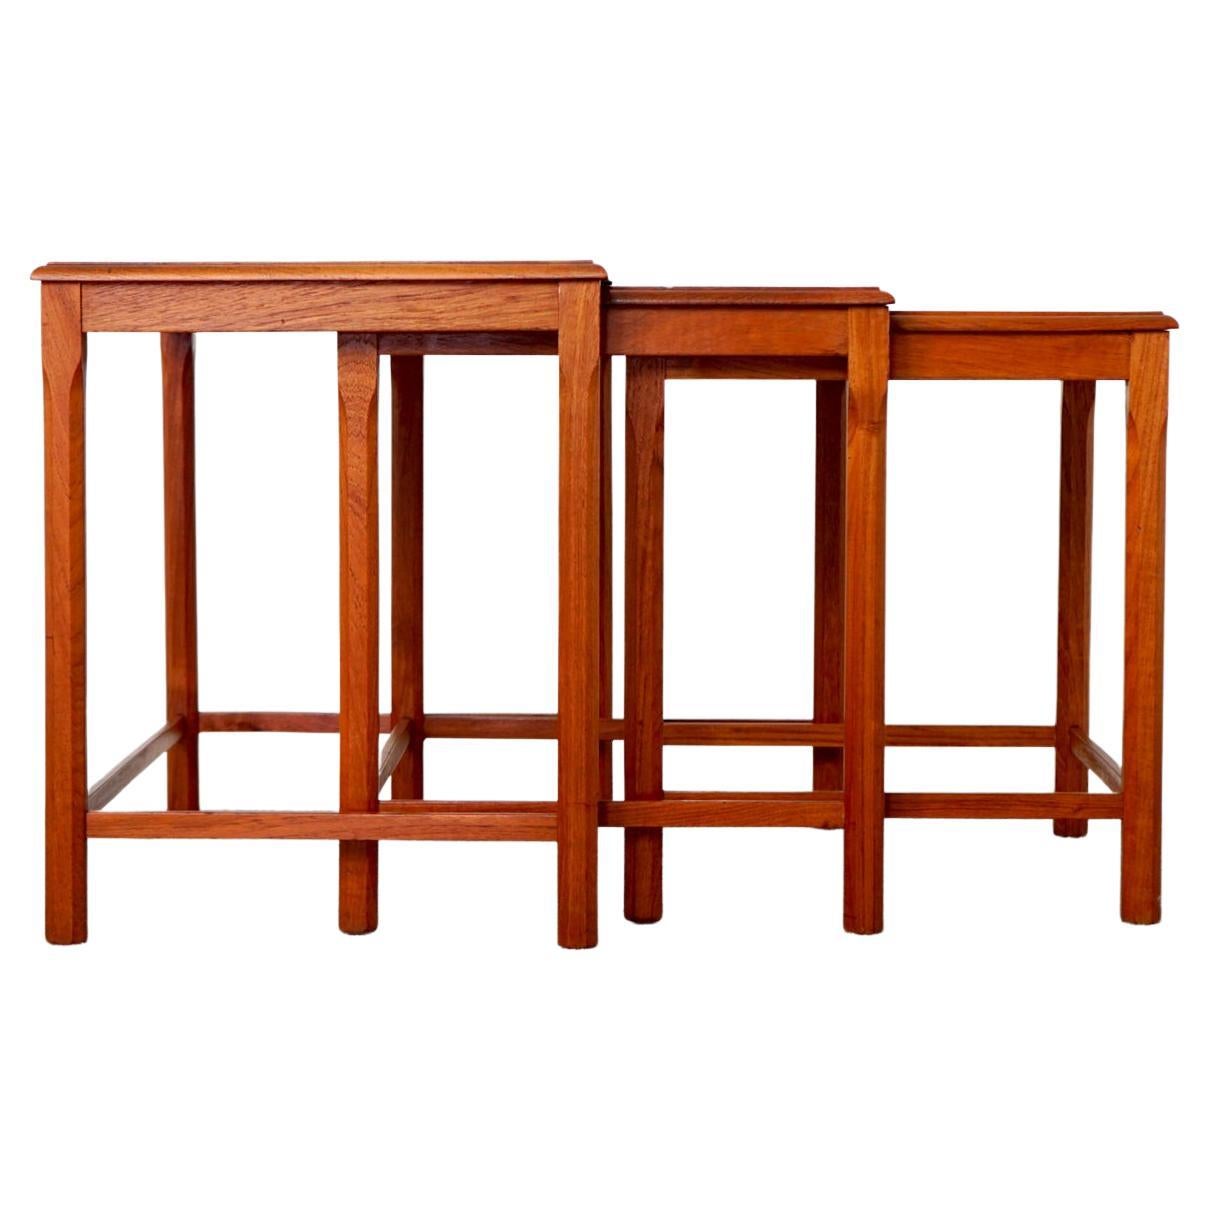 Teak and tile mid-century nesting tables, circa 1960's. Use them individually or nest them together to save space! Each tables features quintessential Scandinavian tile motifs, perfect for placing your drinks, built-in coasters! Space saving design